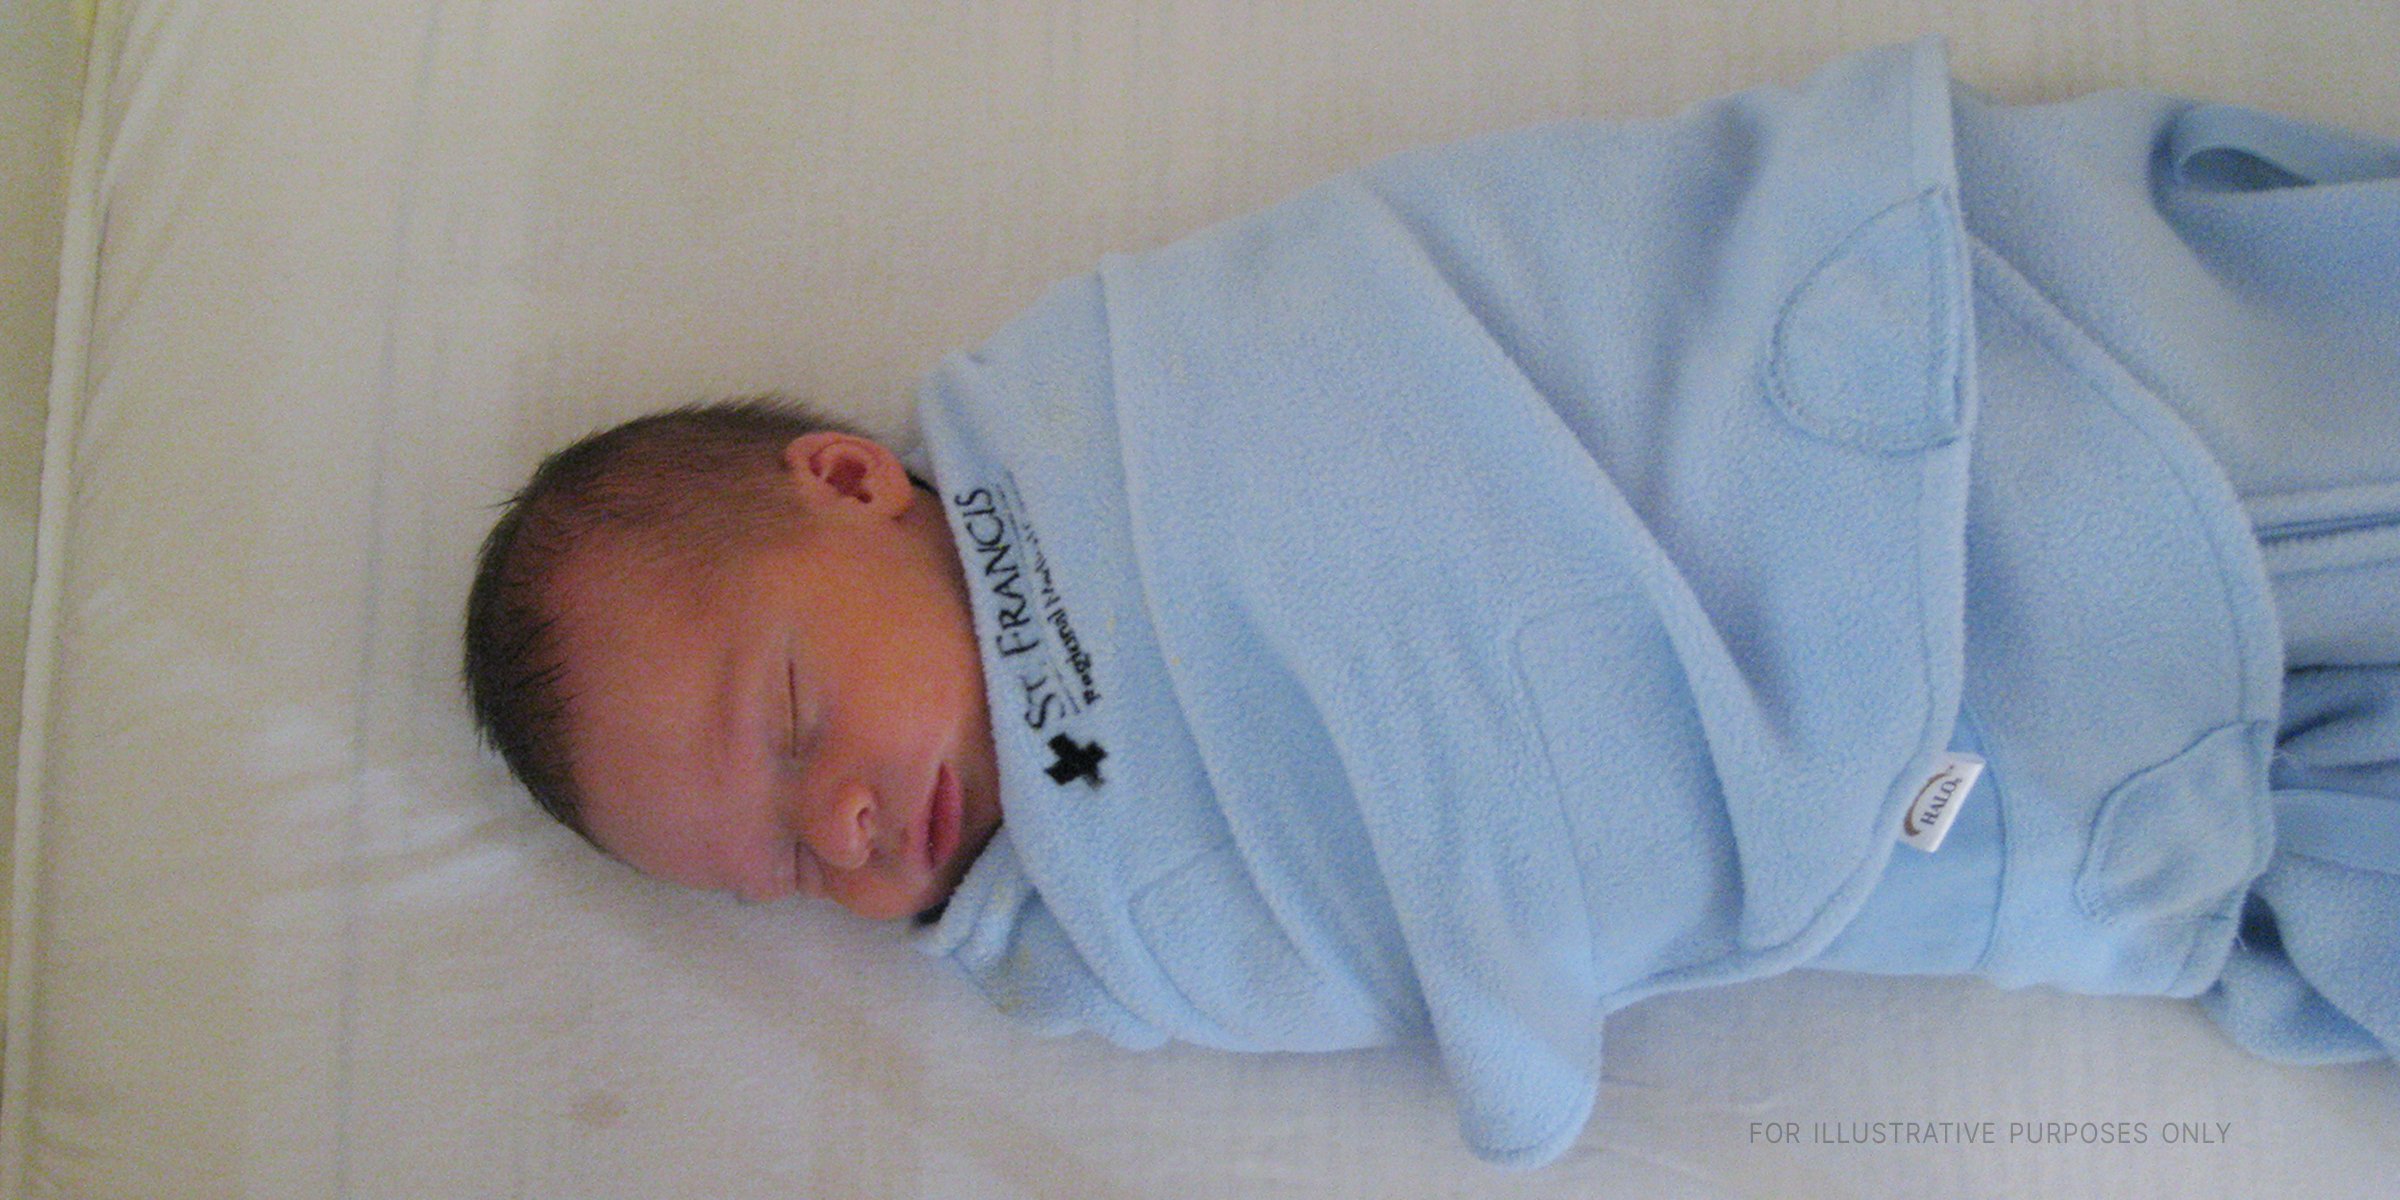 Baby swaddled in a blue blanket | Flickr / EtanSivad (CC BY-SA 2.0)